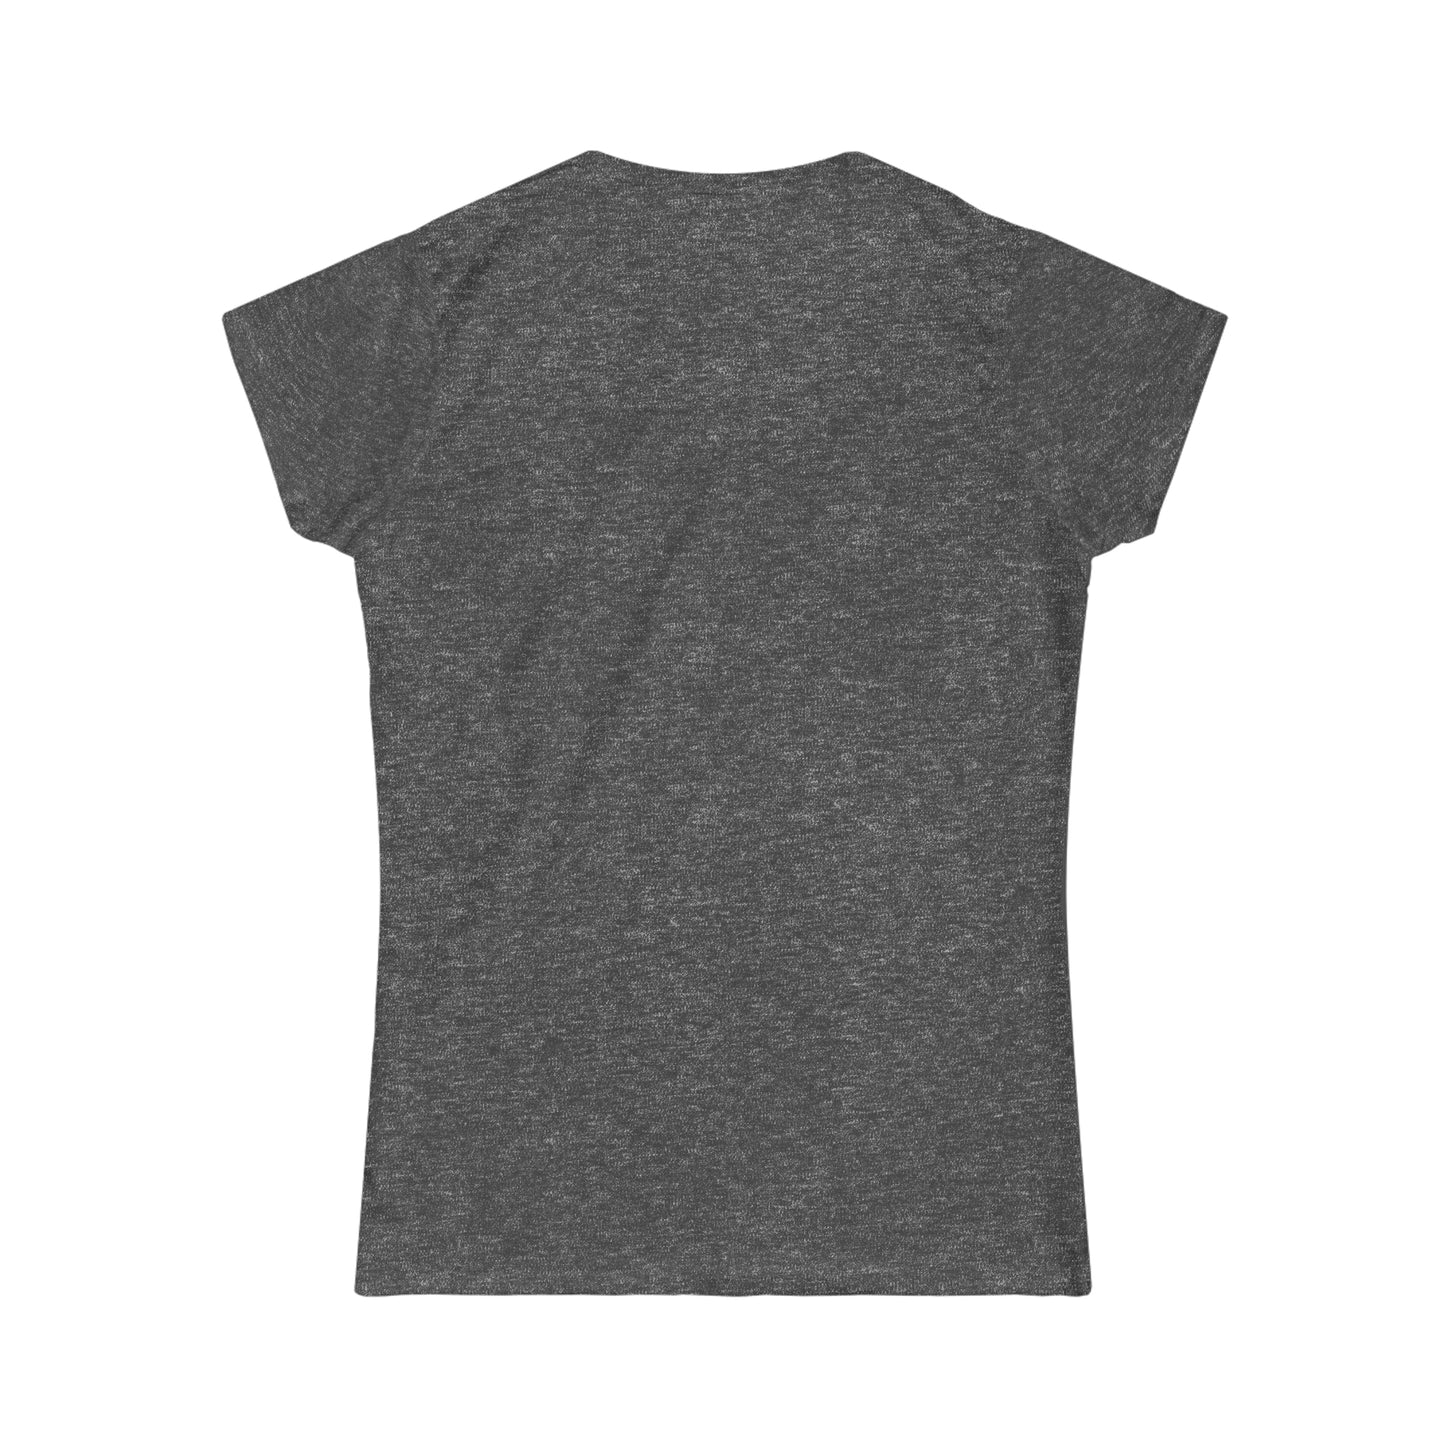 Smooth Rock Falls - Women's Graphic Tee